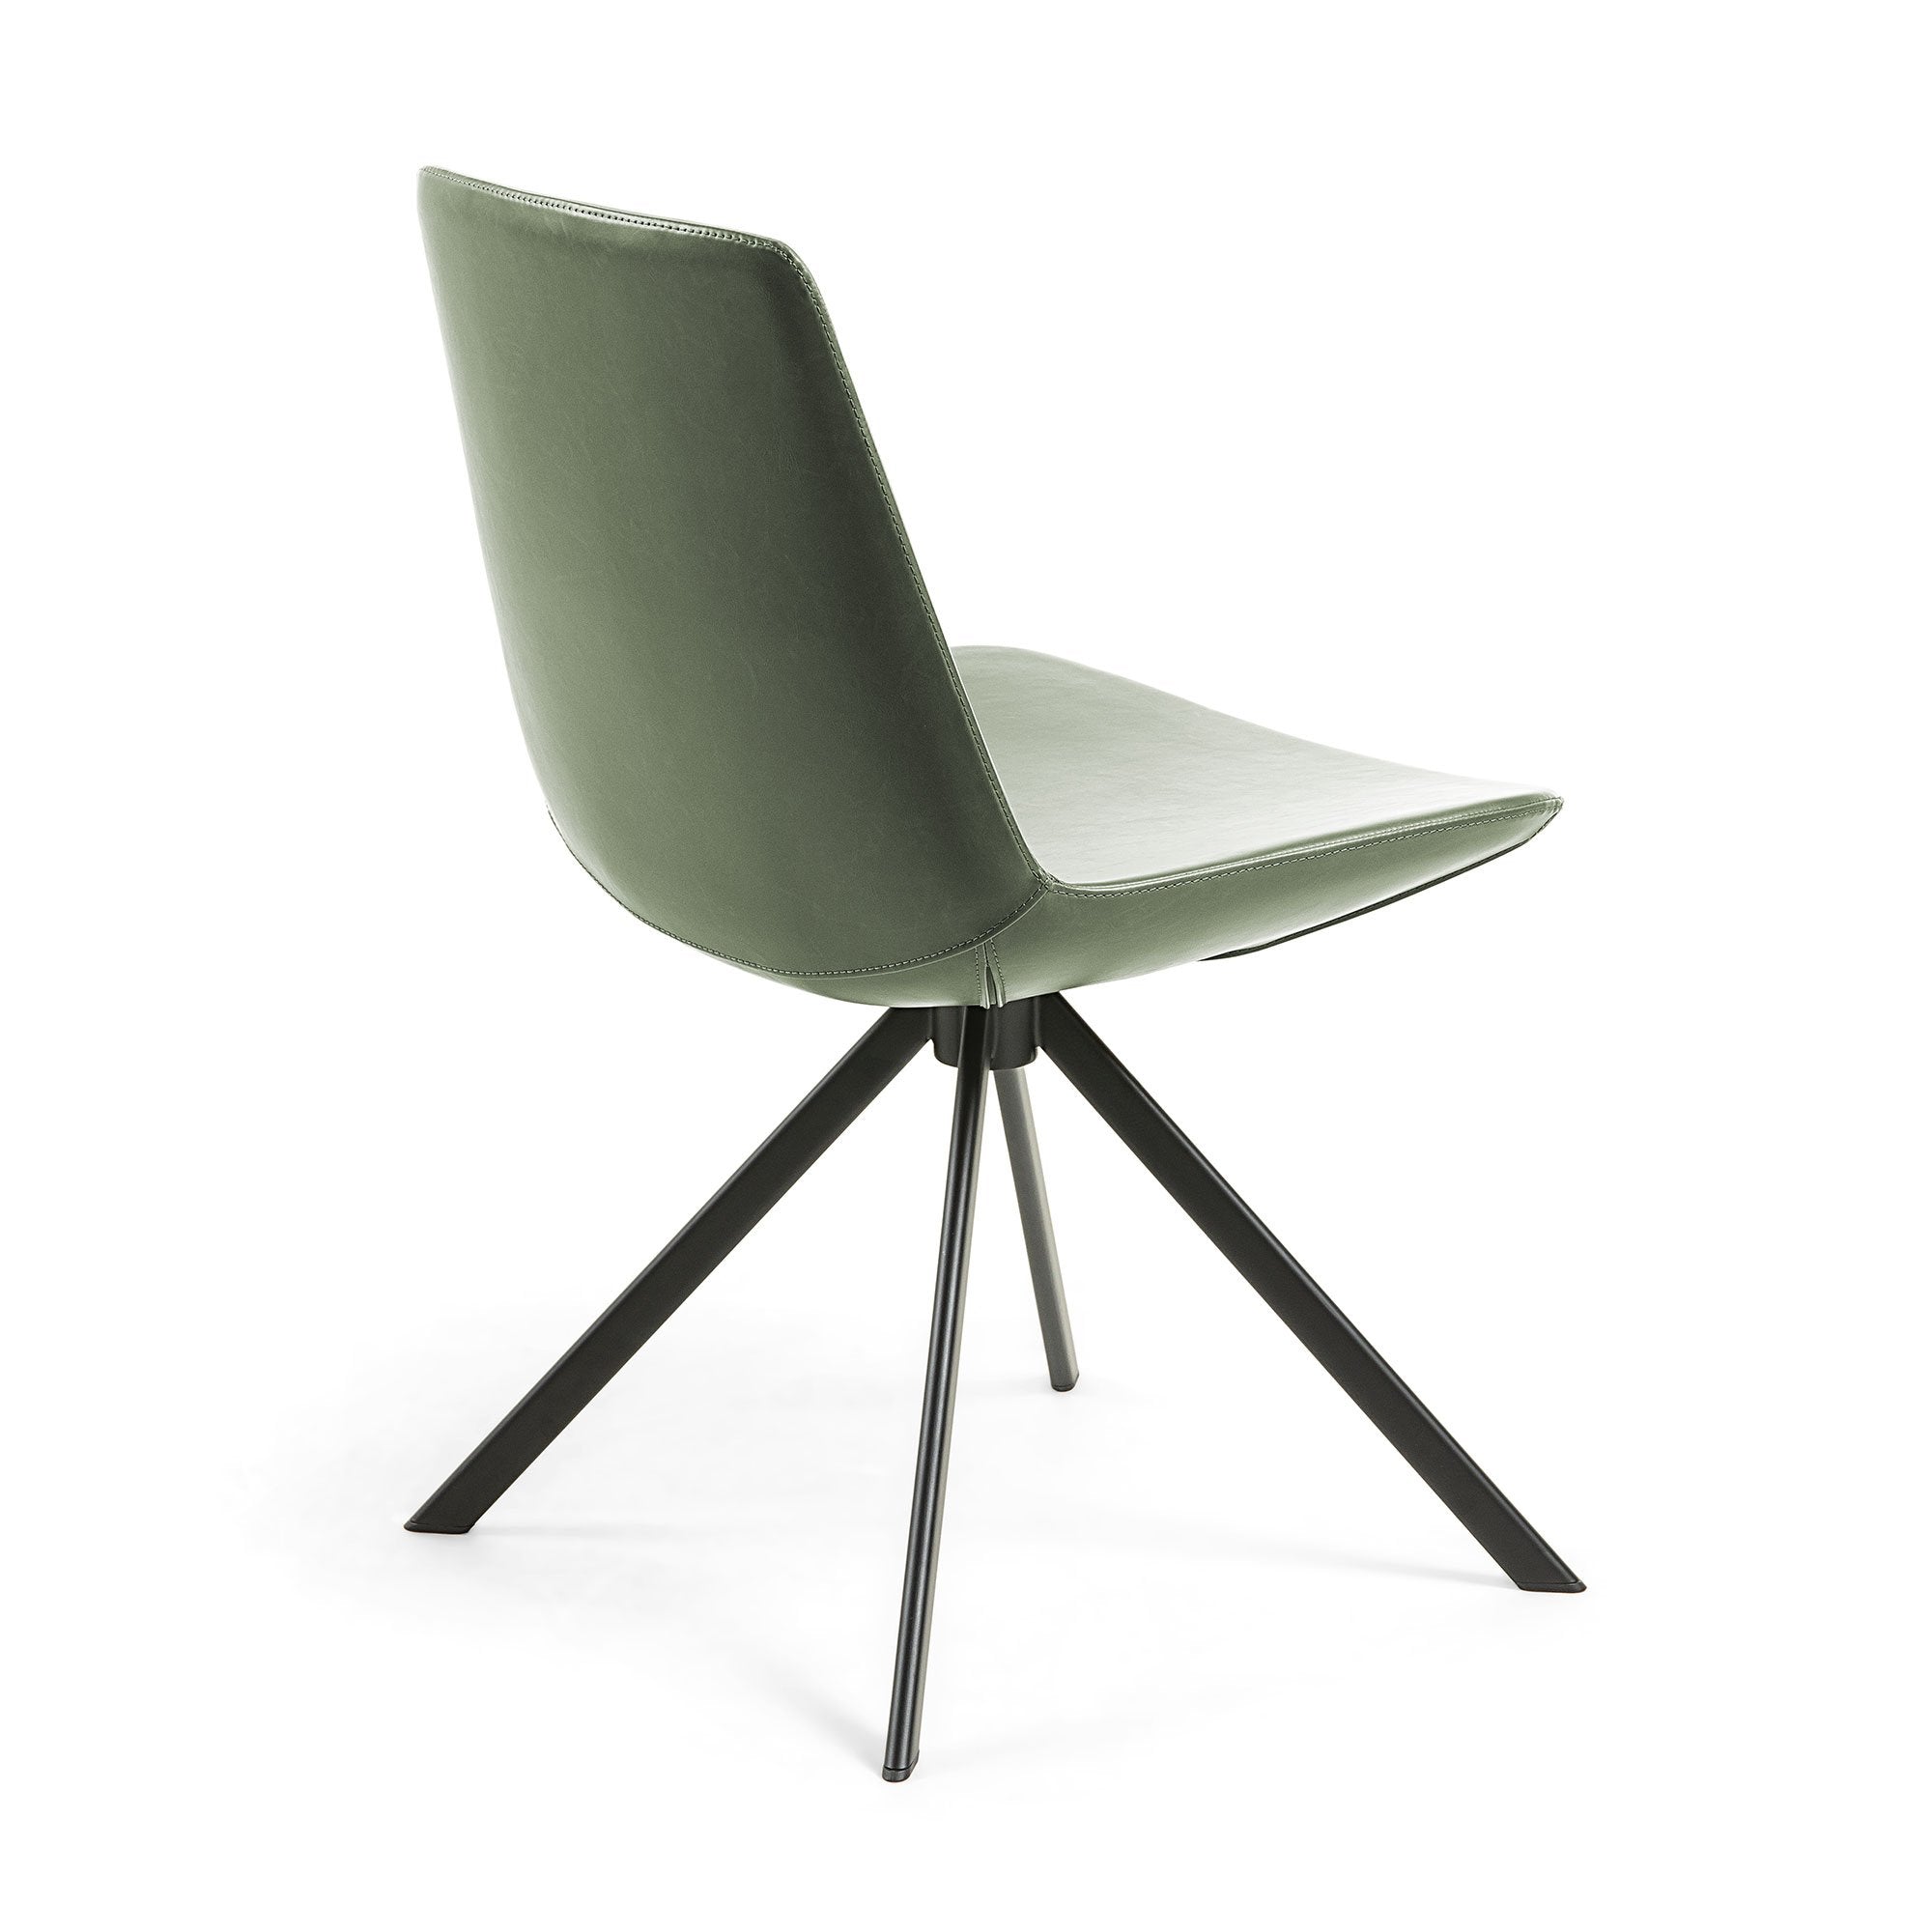 Amelia Leather Dining Chair - Green - Dining Chairs